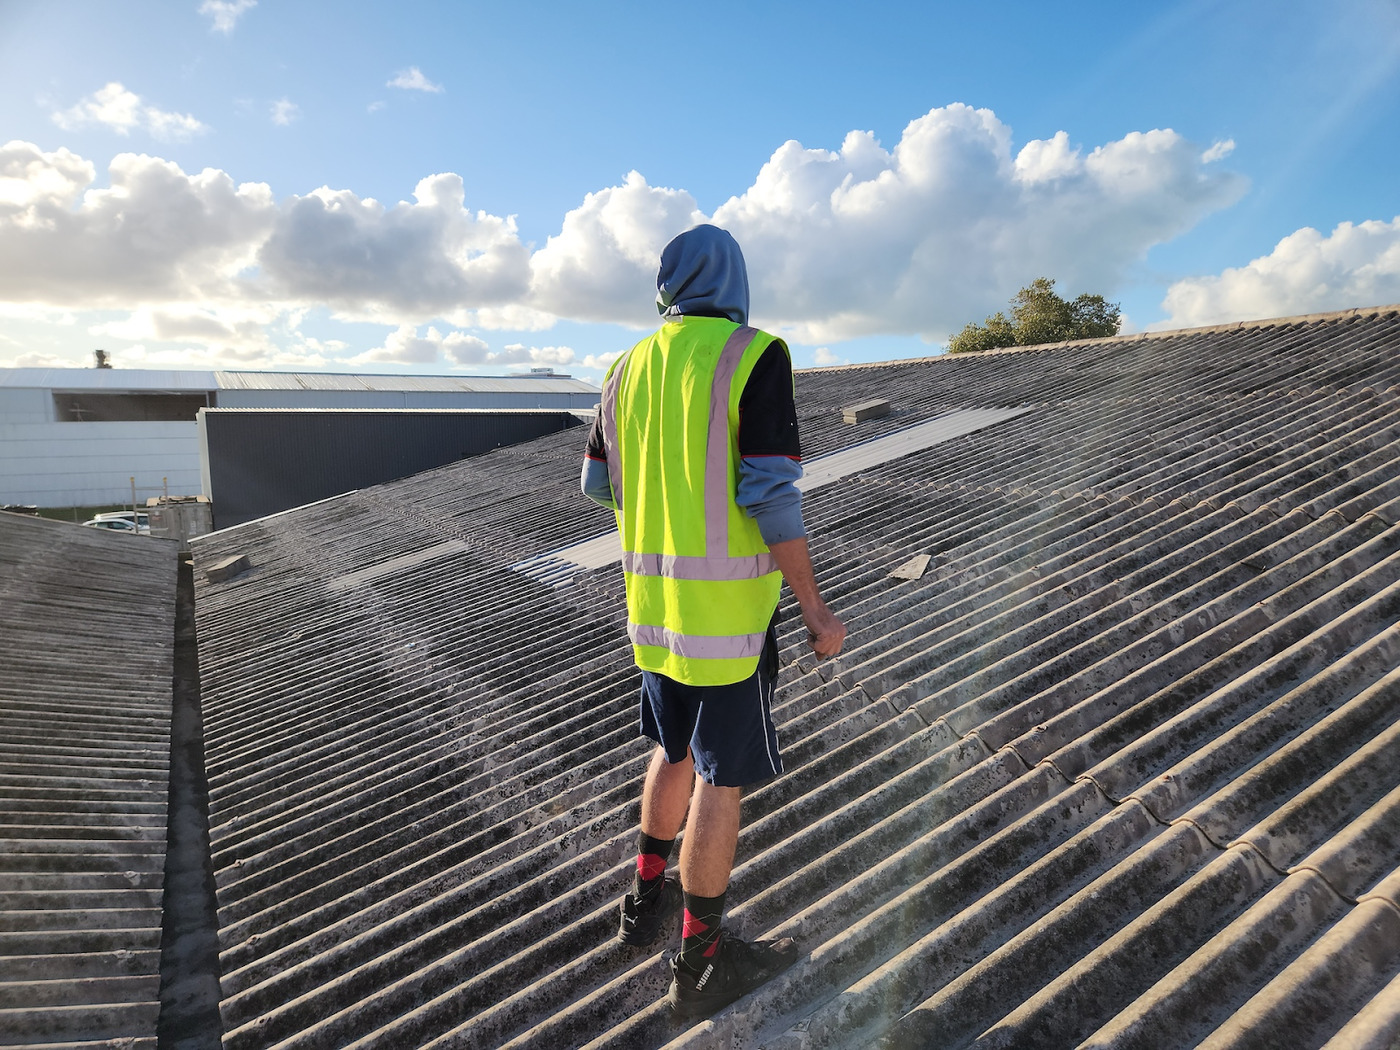 The local roofing specialists based in Auckland have become the trusted name among clients in the region because of their high-quality services, which come with a 10-year workmanship warranty and are also competitively priced.